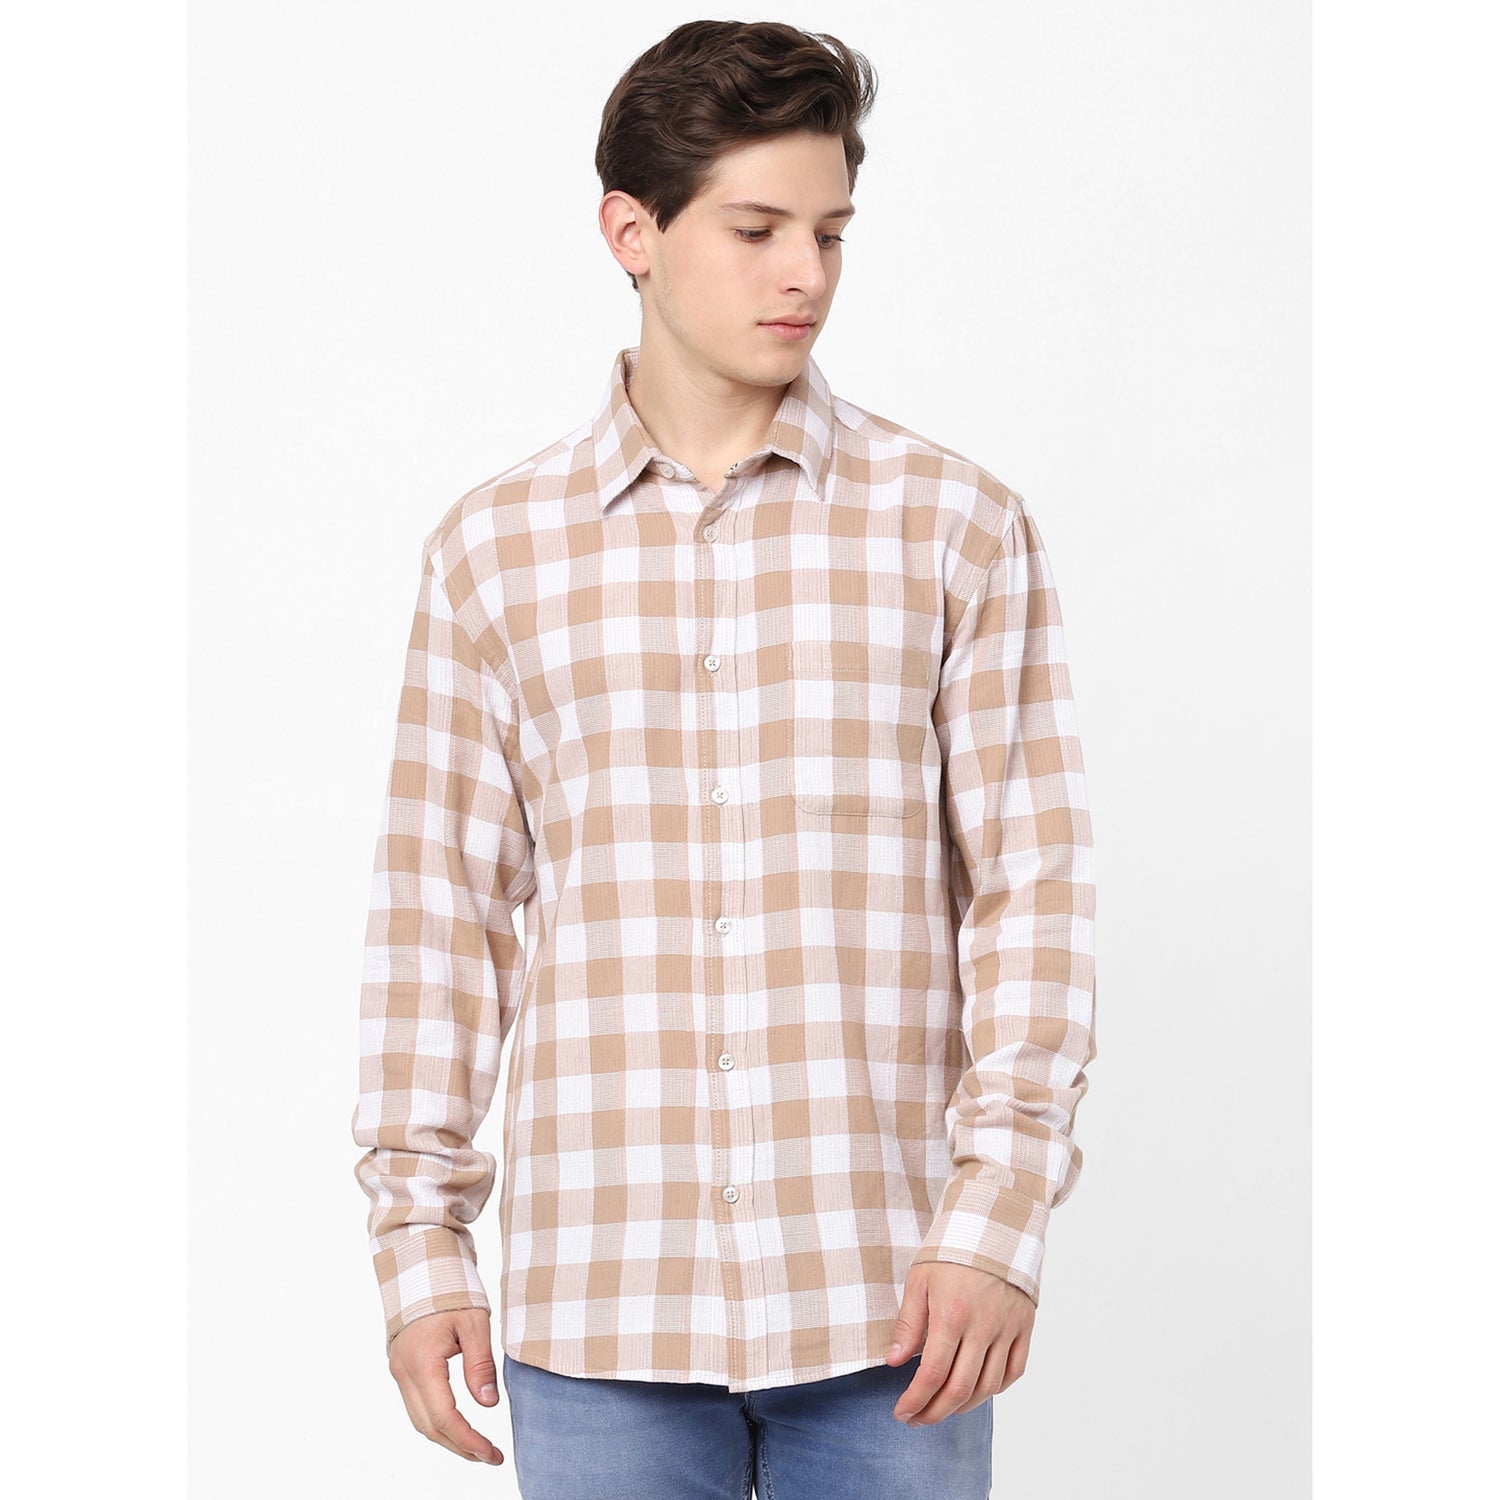 Beige and White Slim Fit Gingham Checked Casual Cotton Shirt (VABOX)